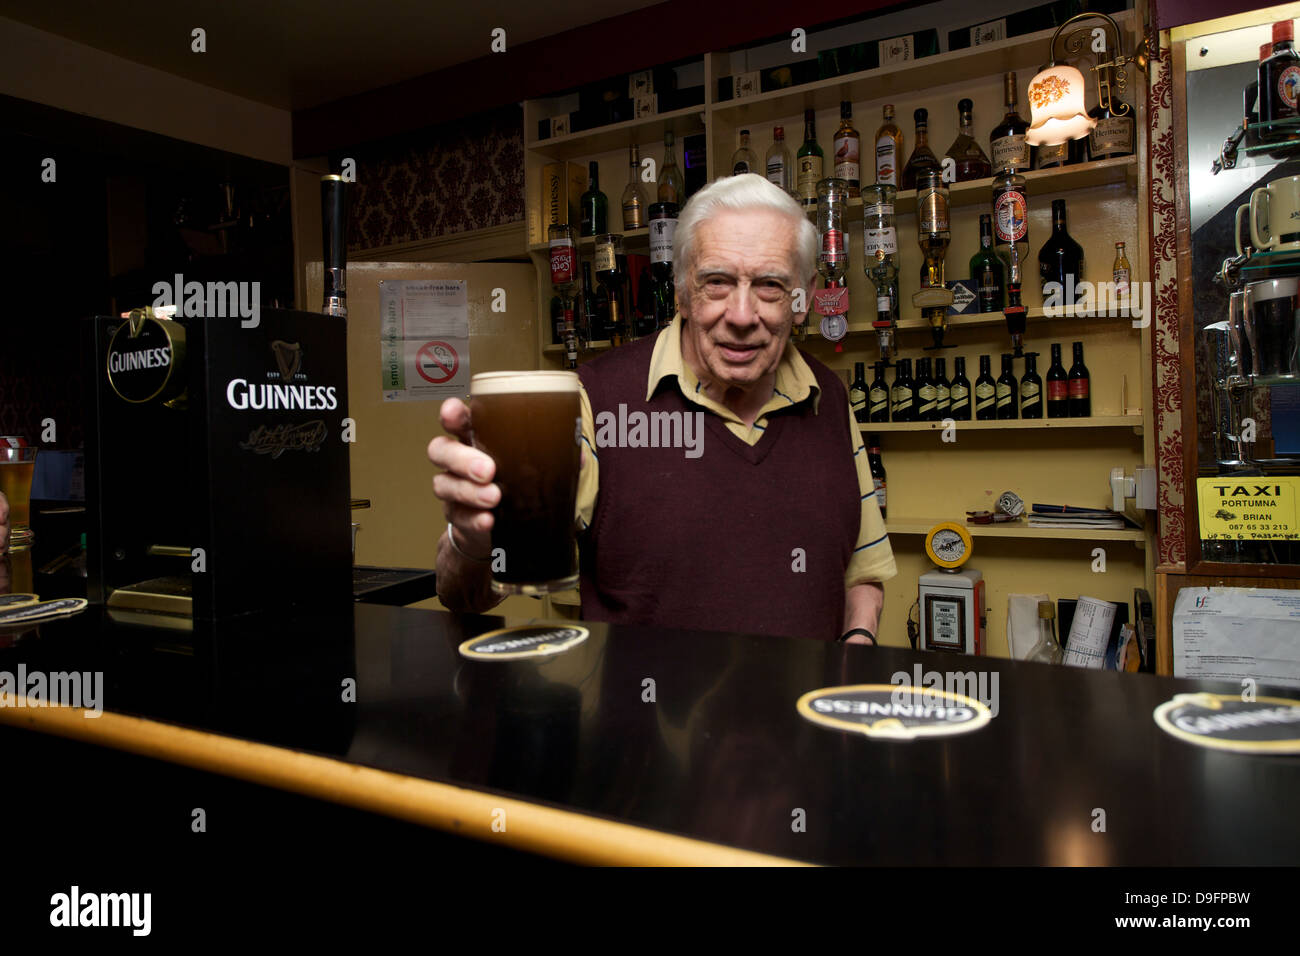 A barman handing over a pint of Guinness in a bar in County Galway Ireland Stock Photo